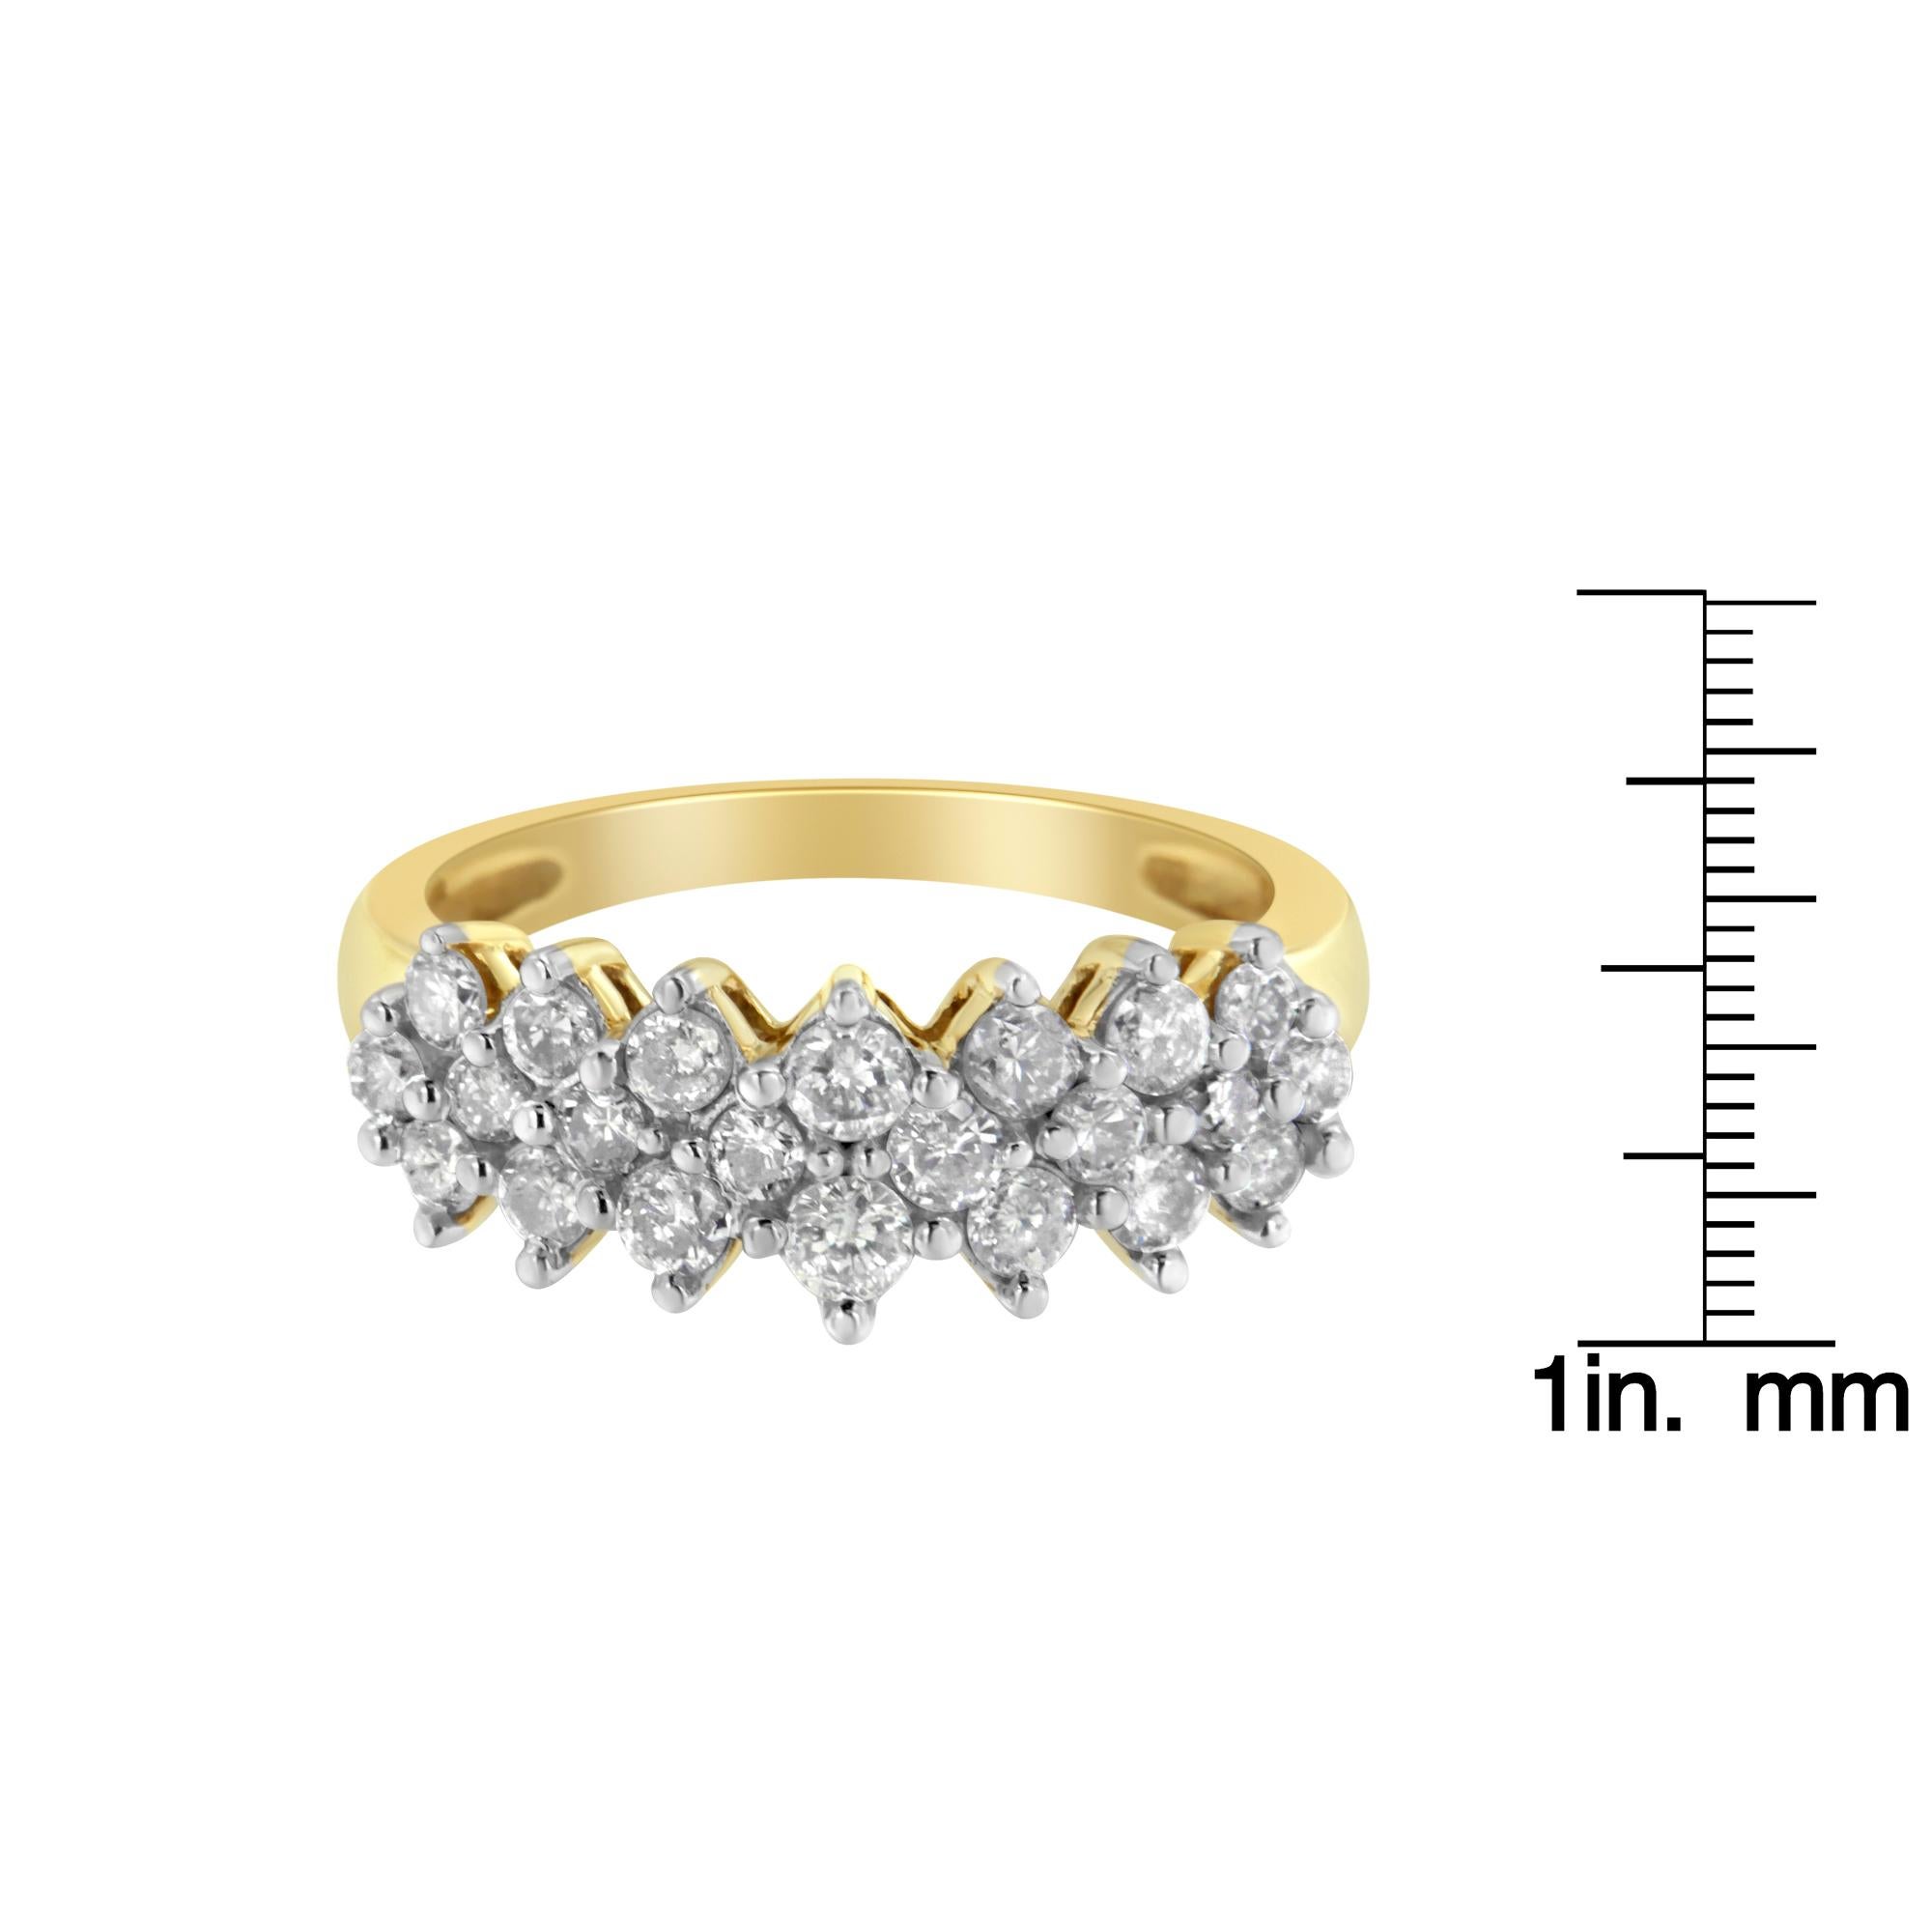 This diamond cluster band features 22 diamonds horizontally prong set in three rows along the 10 karat yellow gold band. The elongated prongs along the basket add interest to this classic design. The total diamond weight is 1 carat.

Product